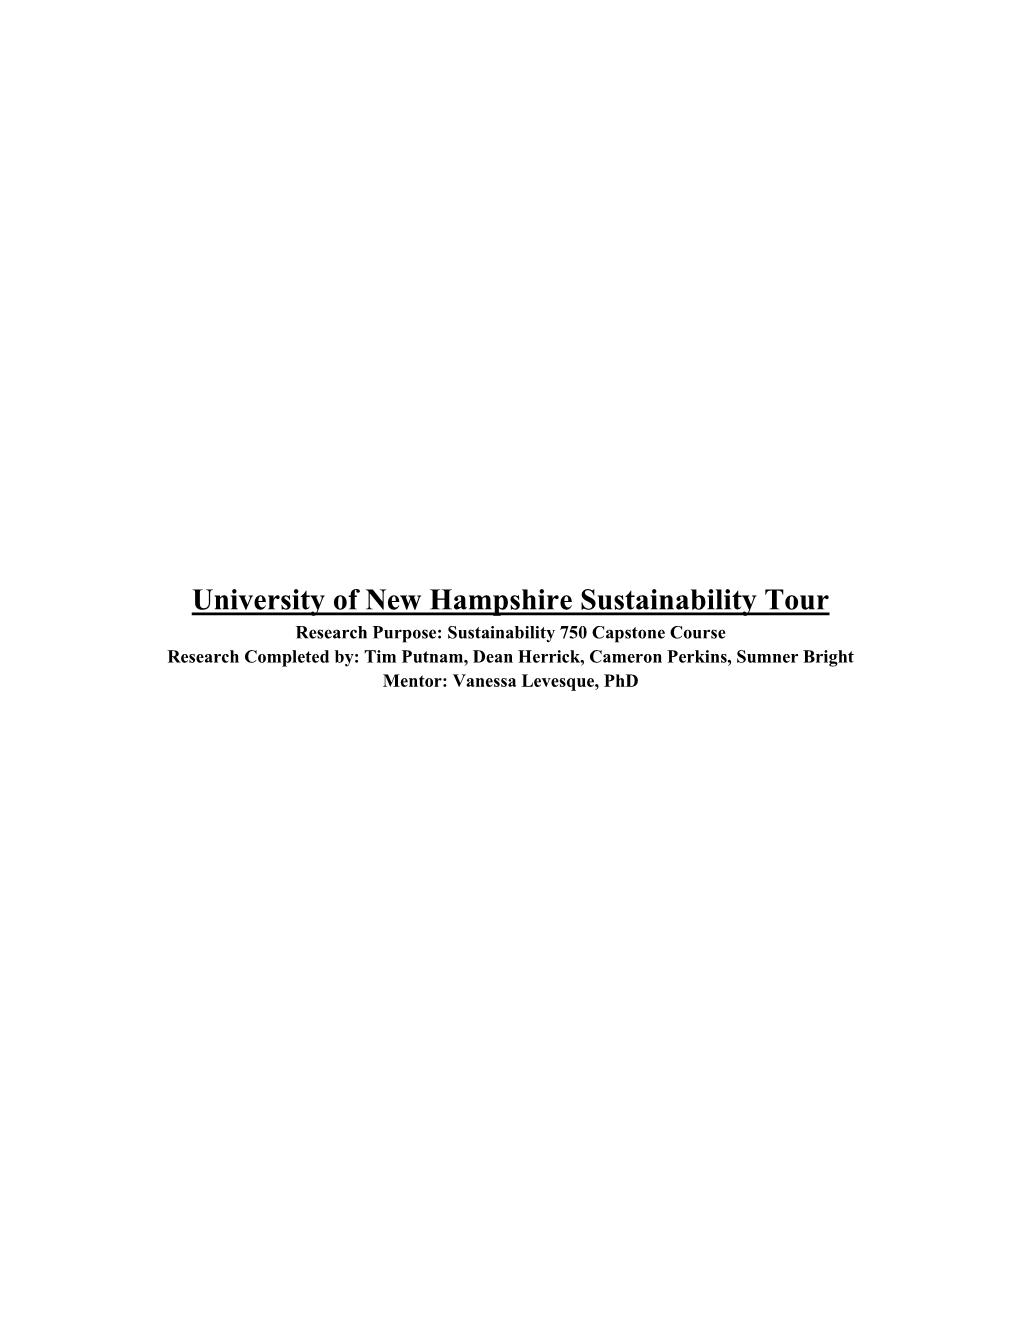 Sustainability Tour Final Paper